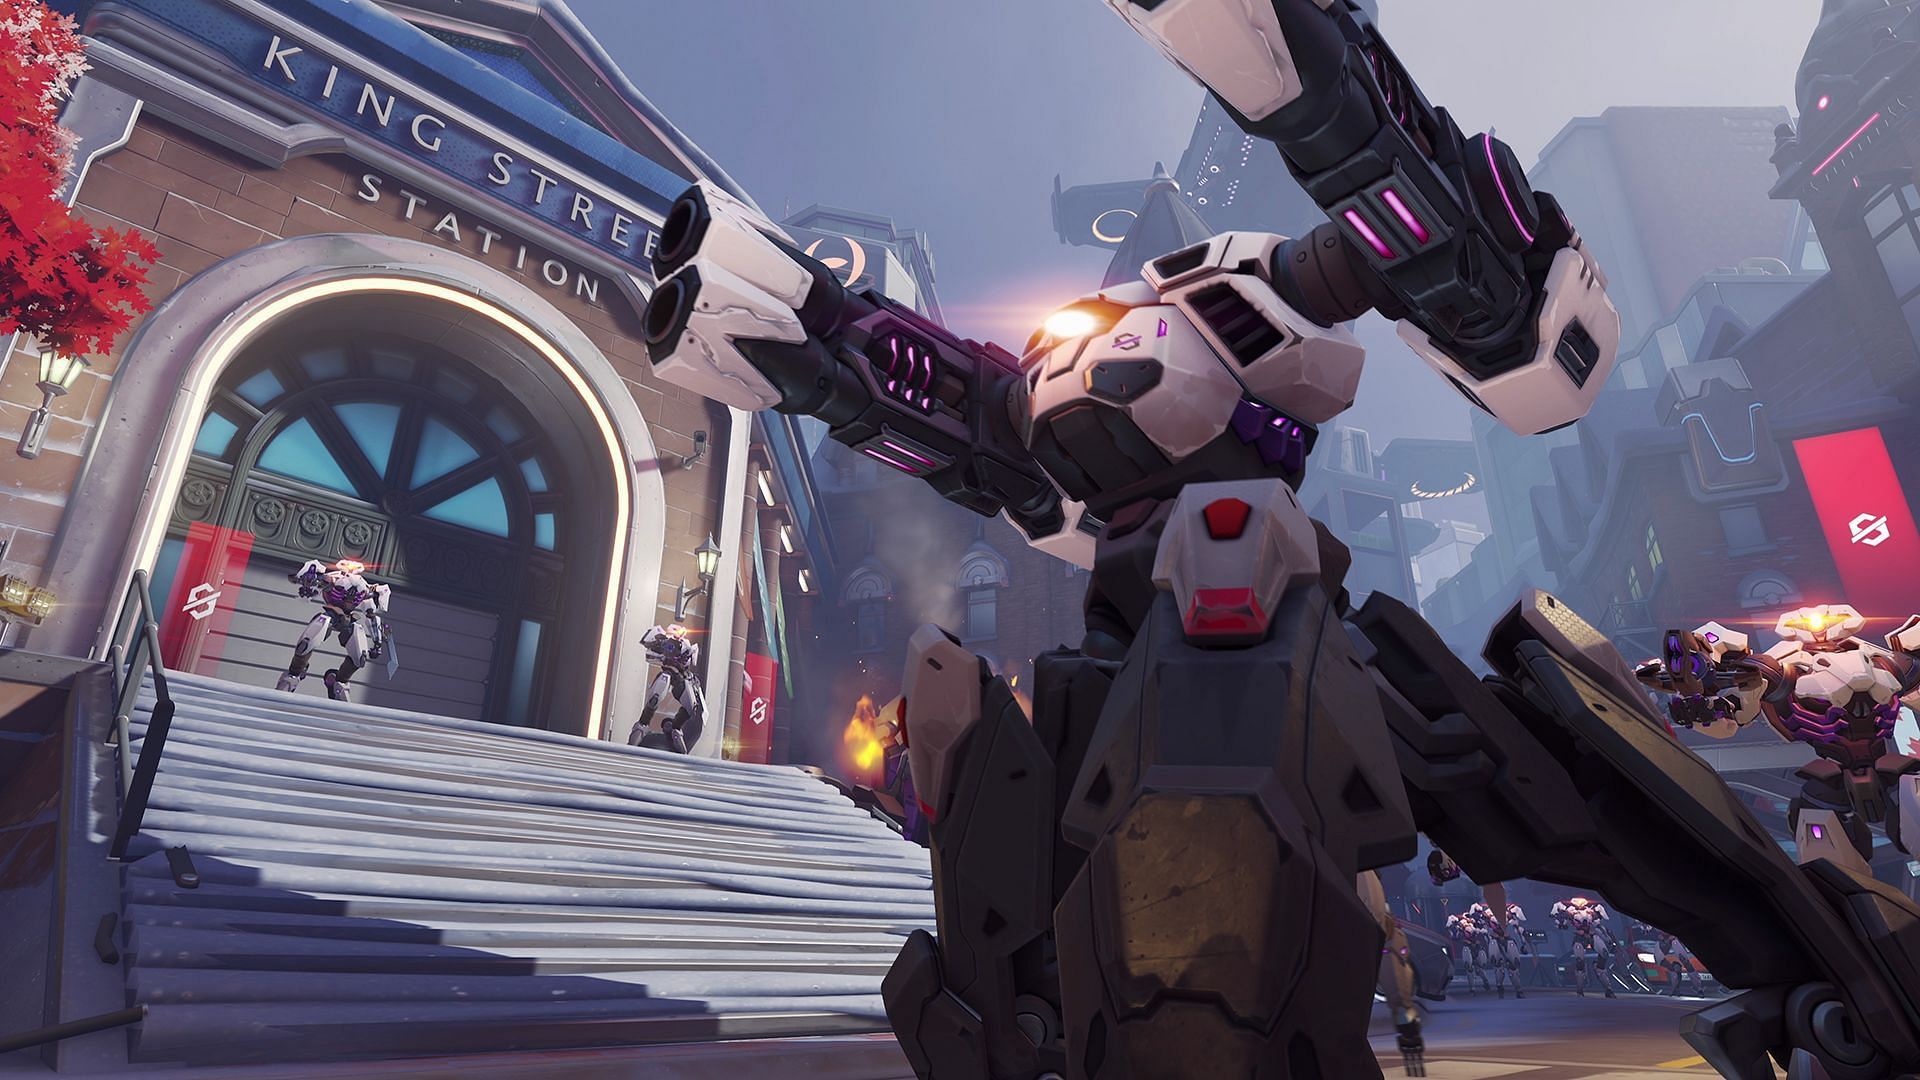 Story Missions in Overwatch 2: Invasion (Image via Blizzard Entertainment)